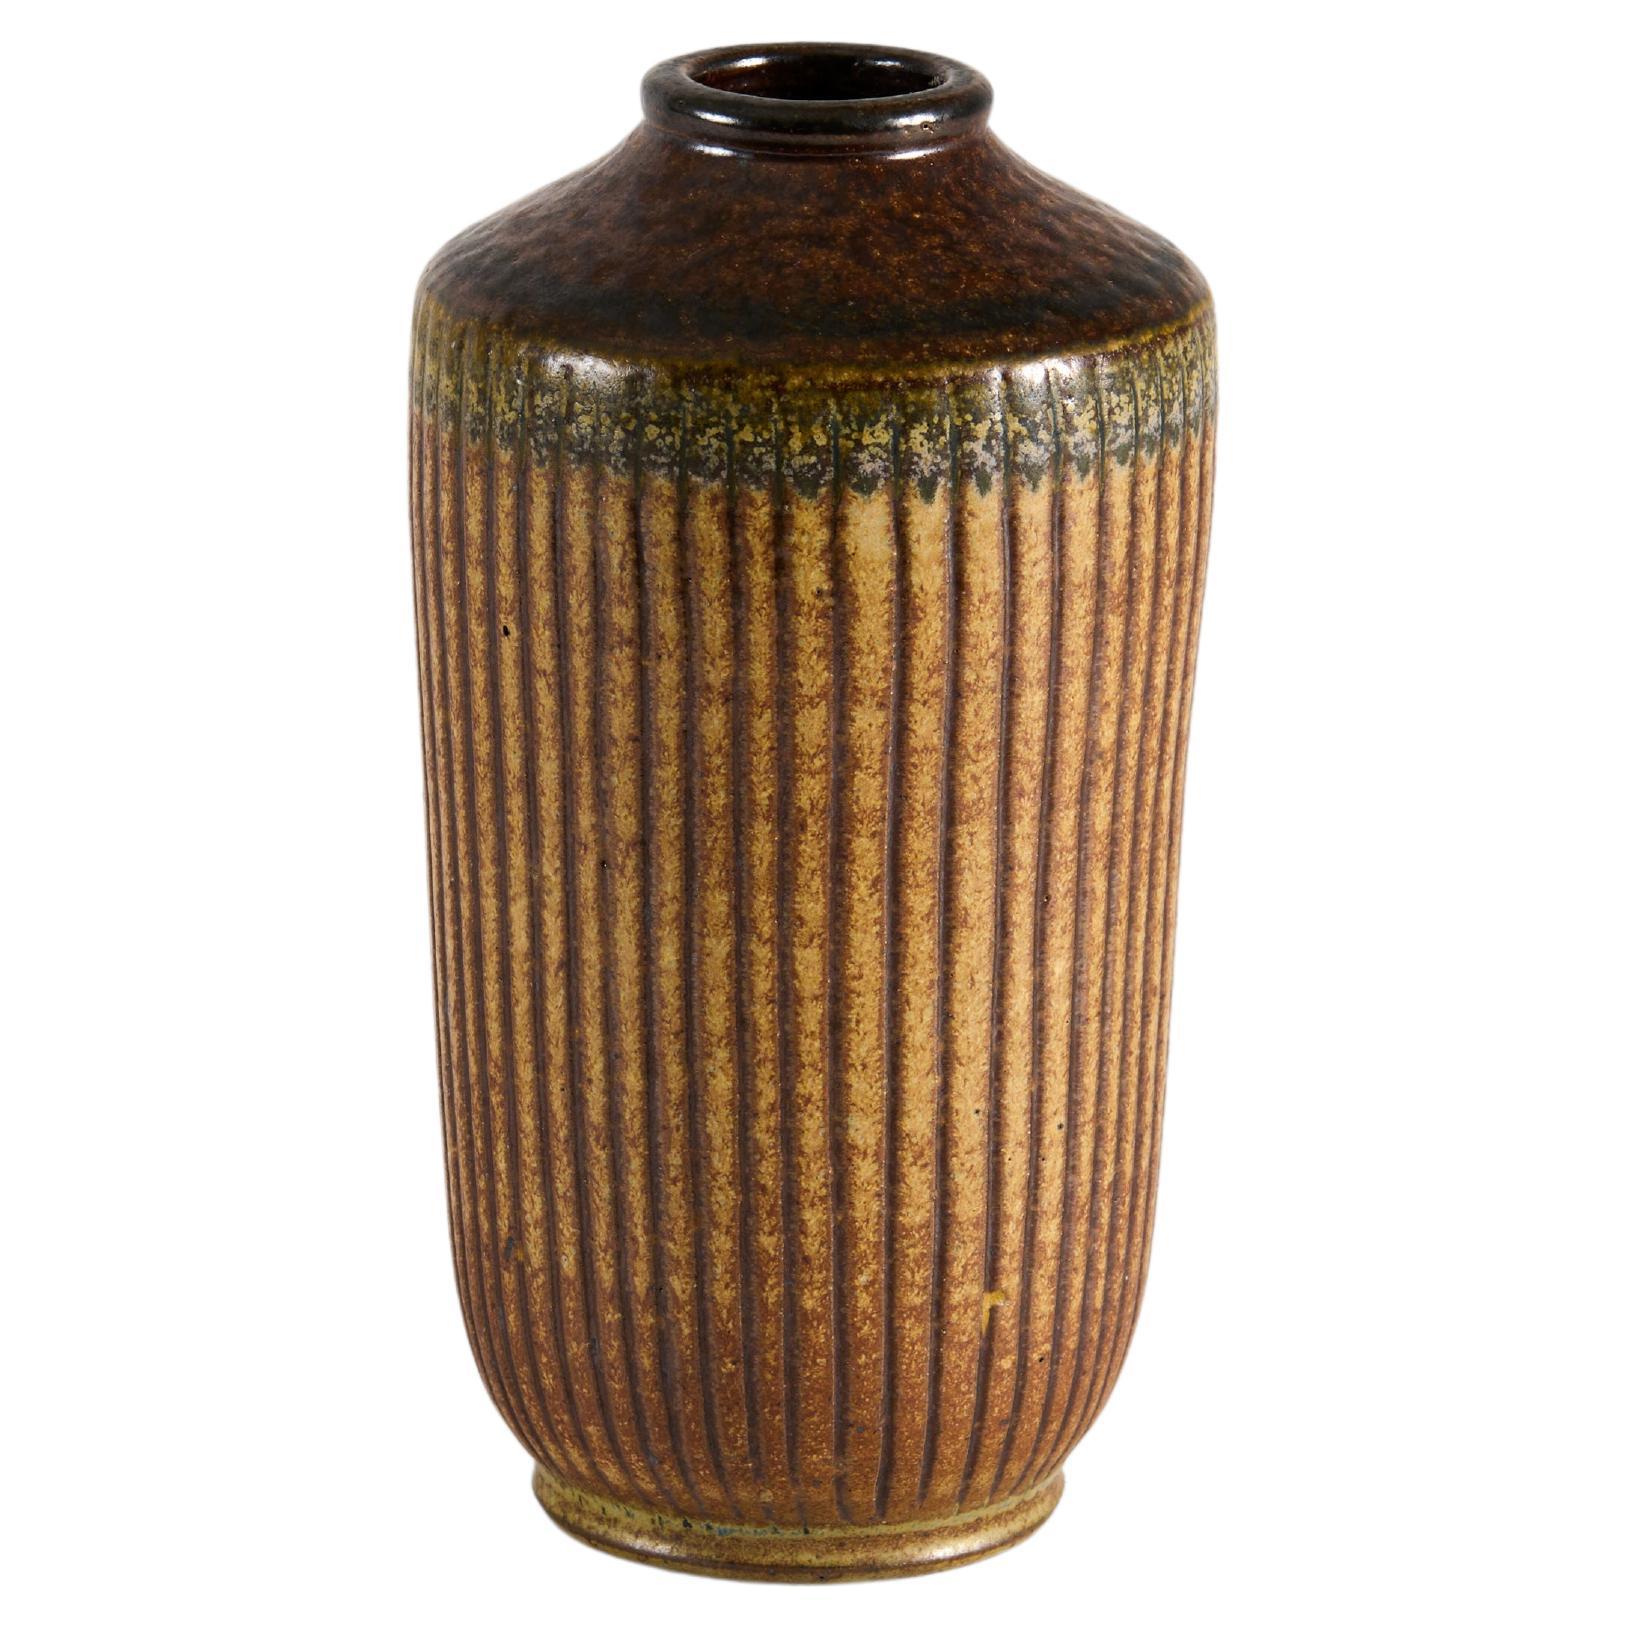 Ceramic Vase with Earth-toned Patterned Glaze, Wallåkra, Sweden, 1960s For Sale